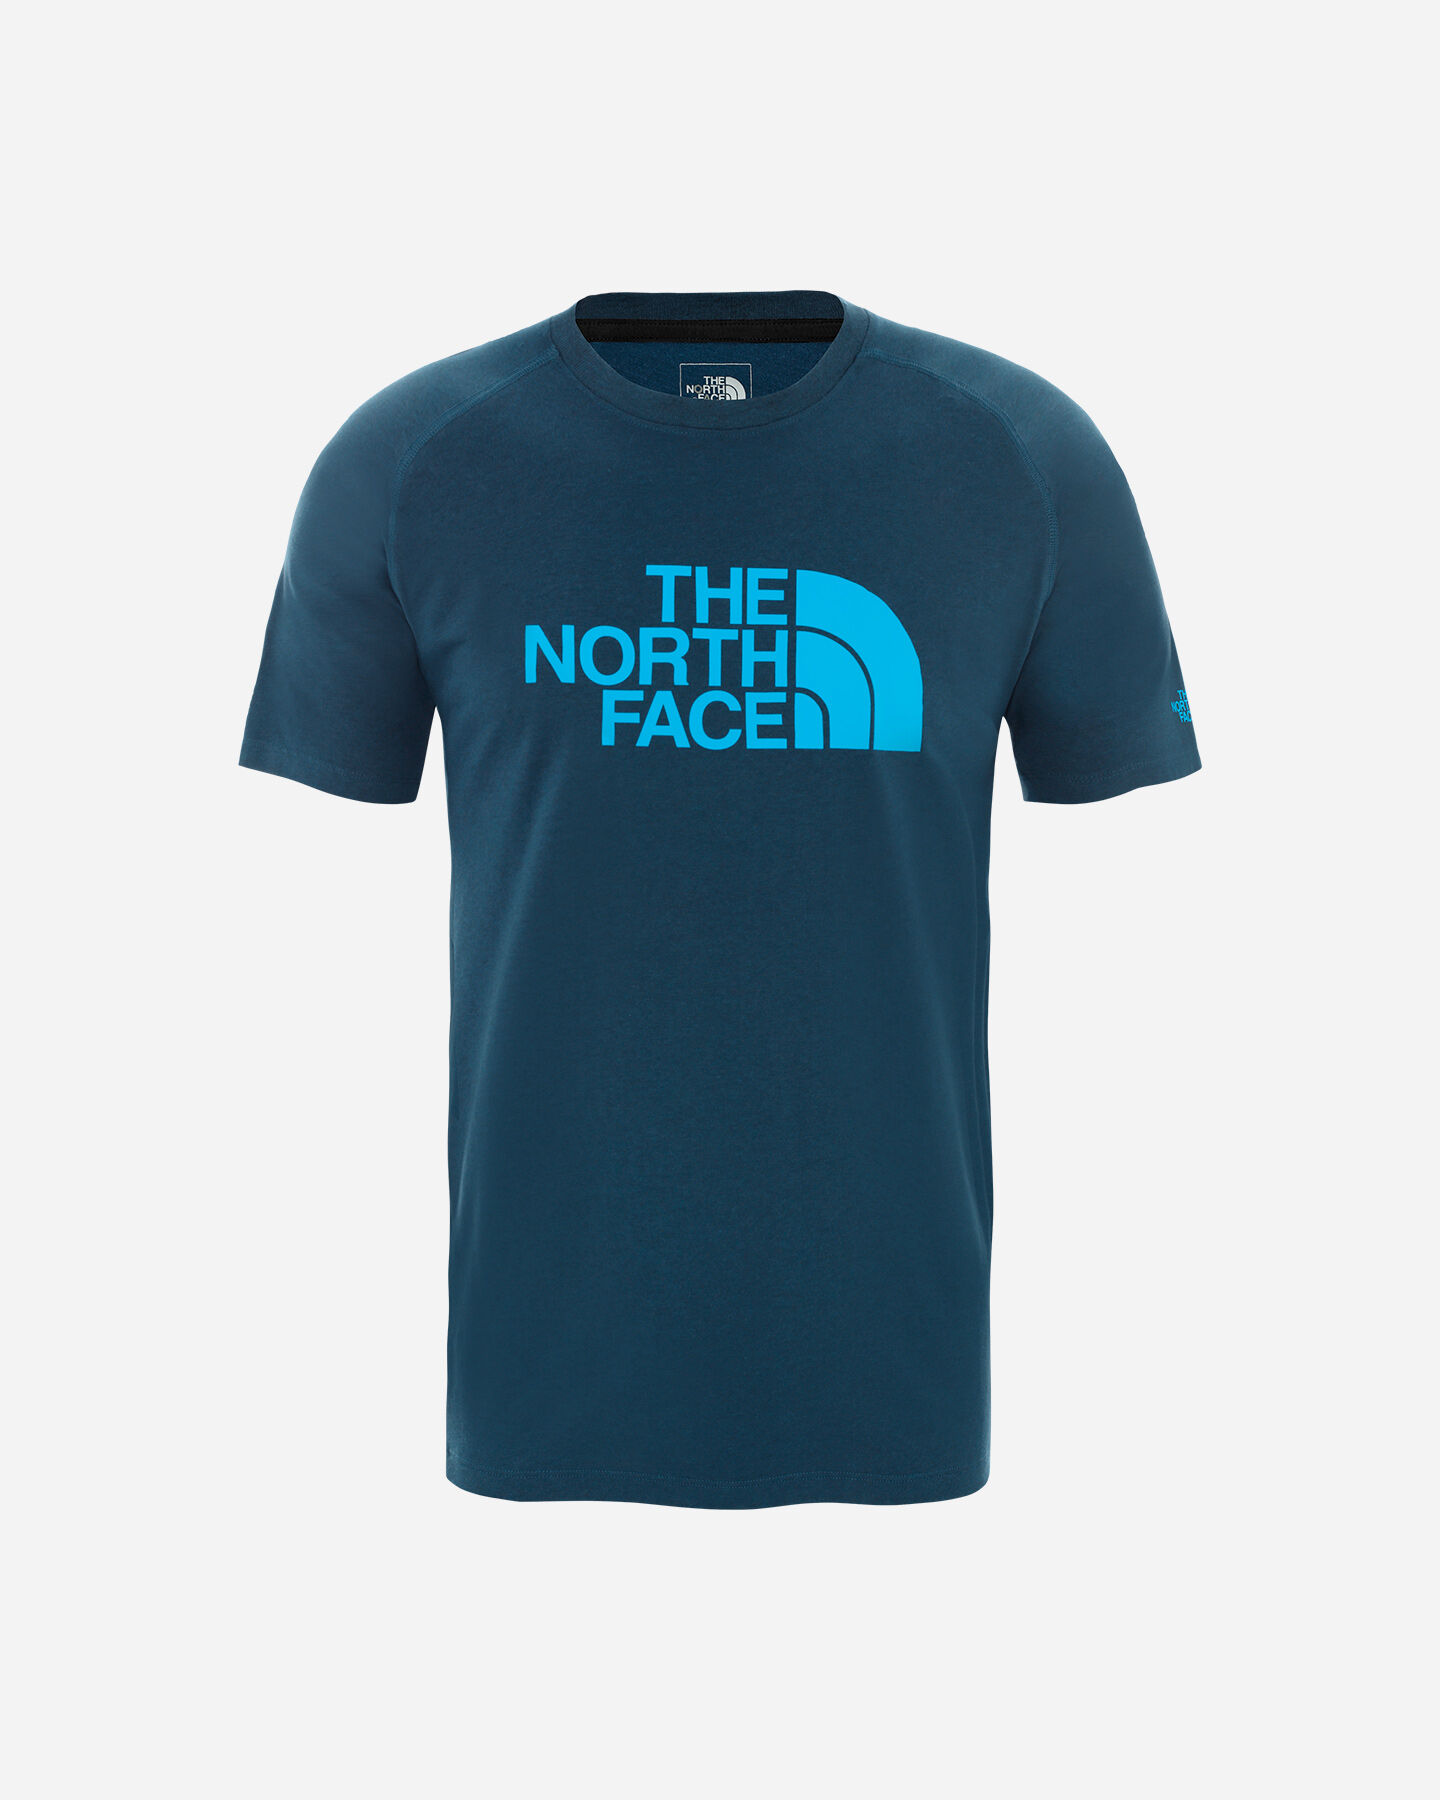  T-Shirt THE NORTH FACE WICKER M S5192886|1LG|S scatto 0